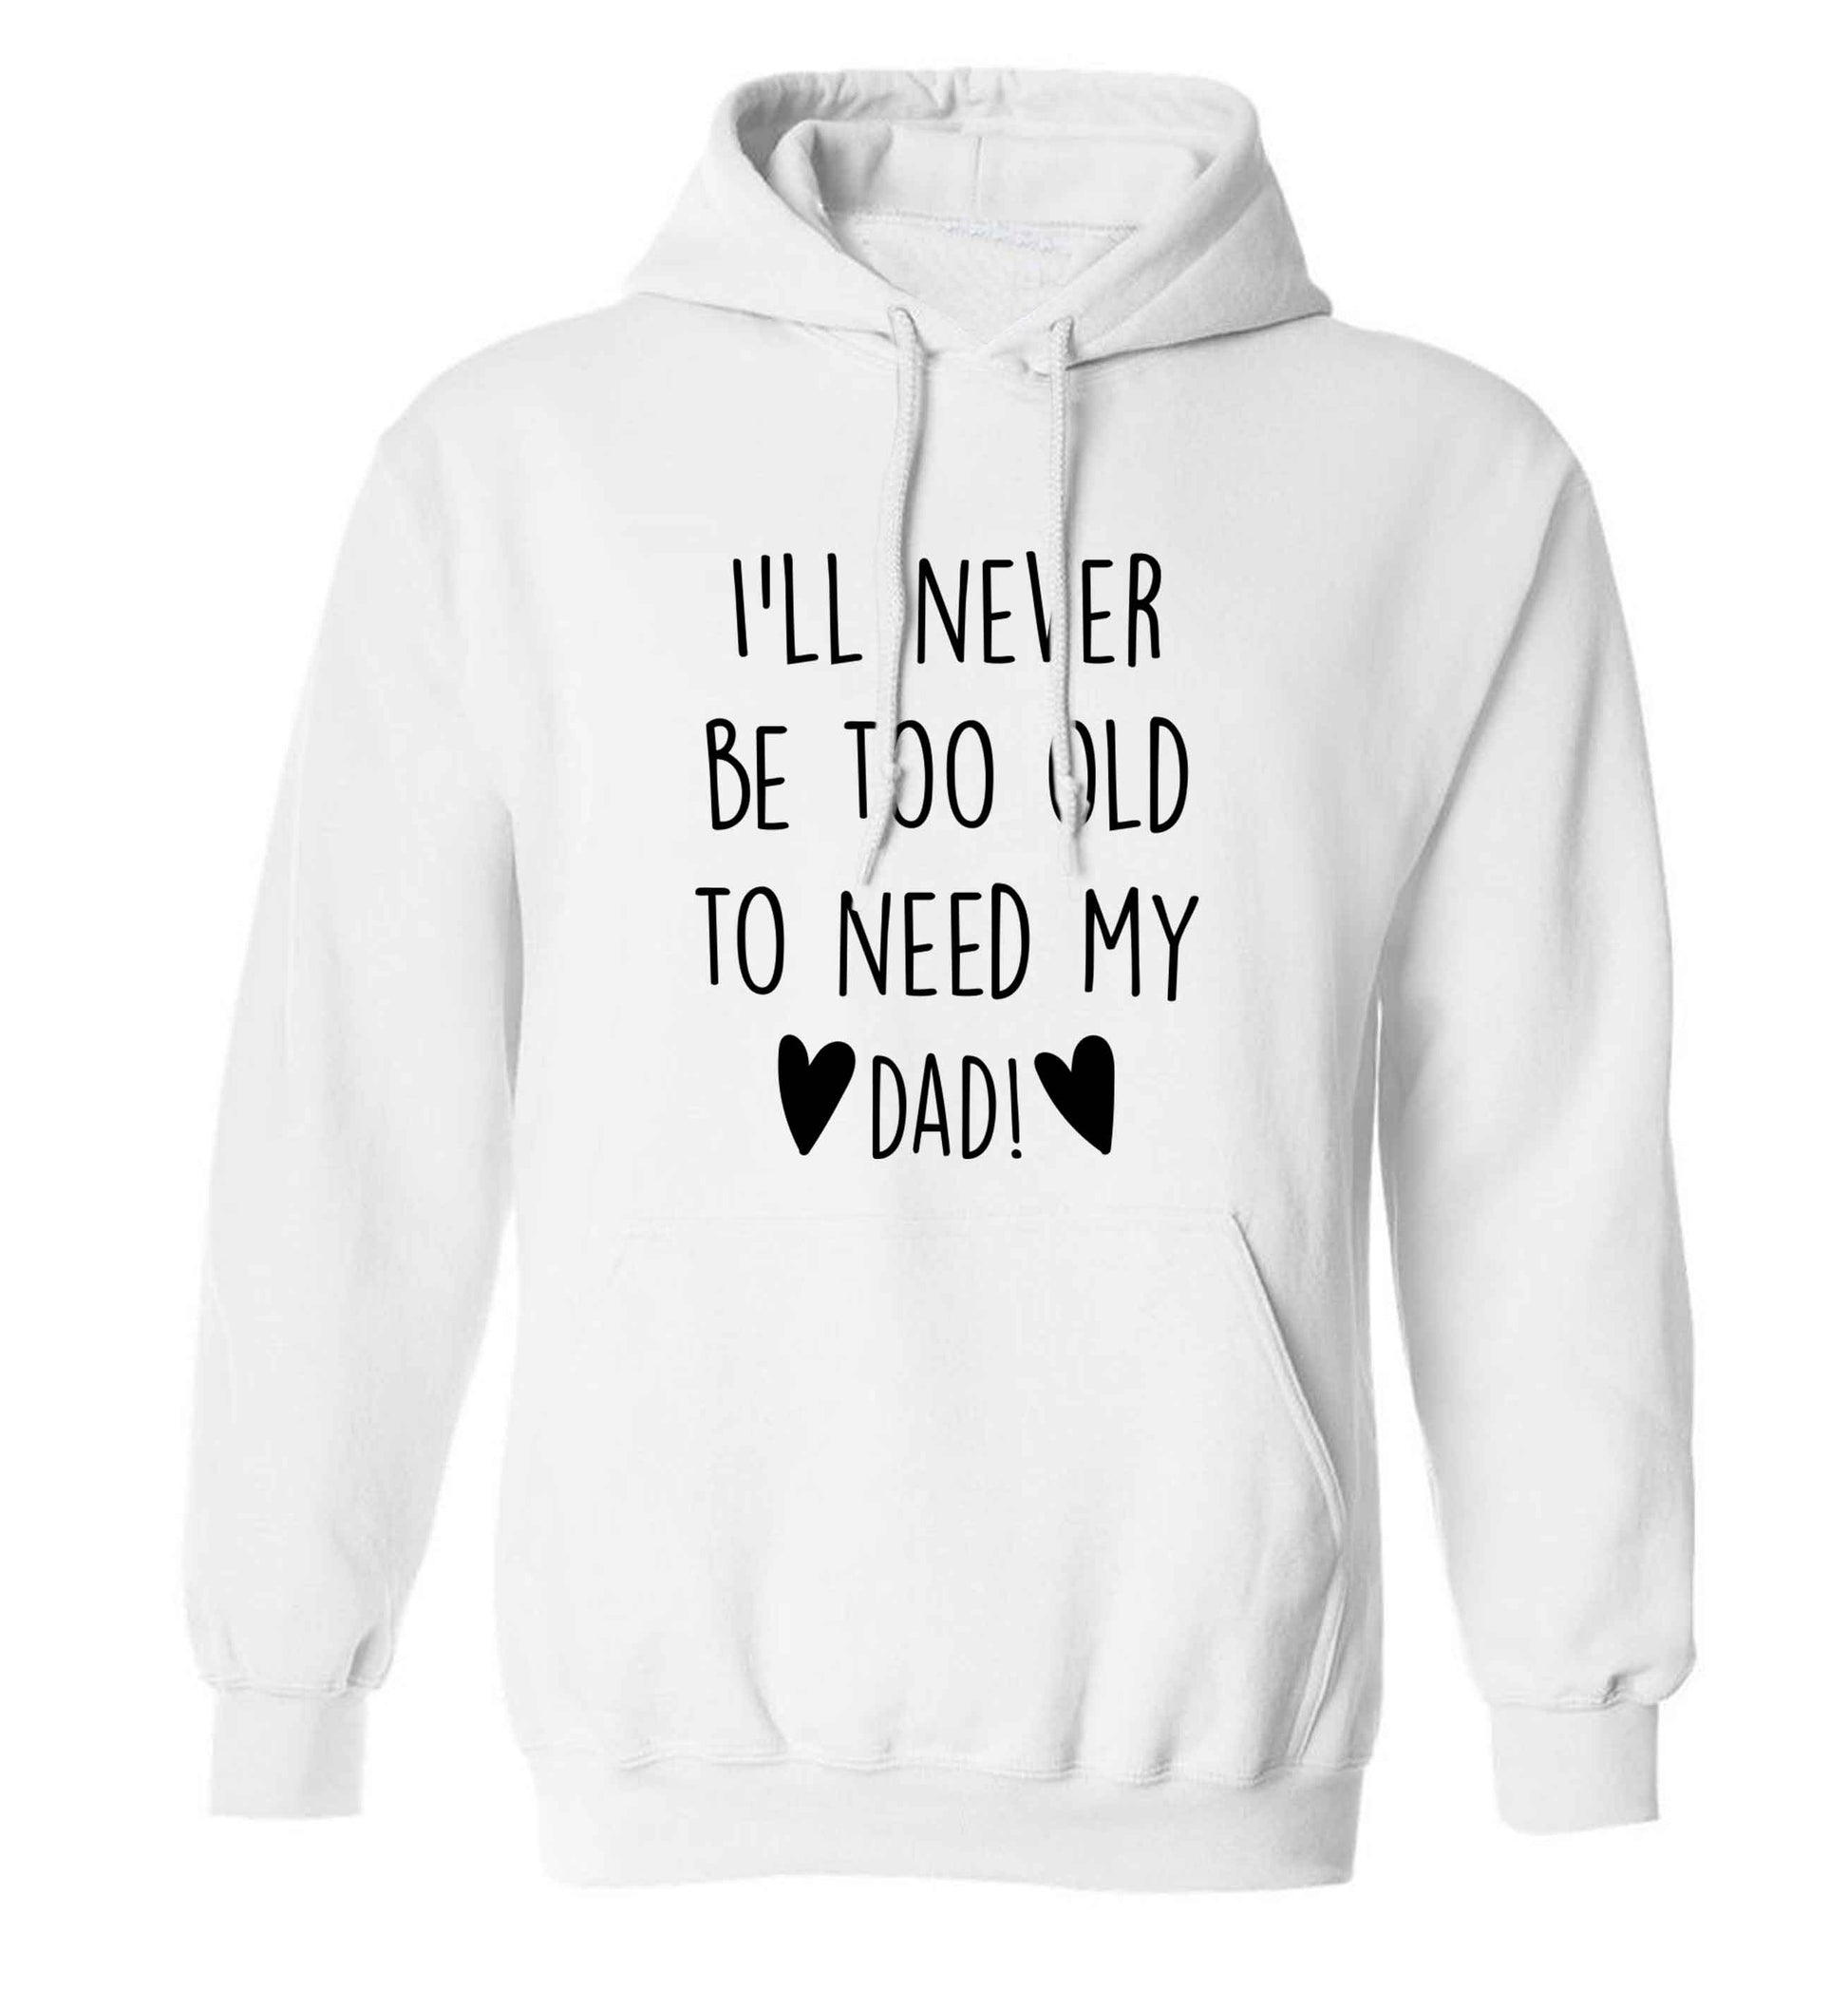 I'll never be too old to need my dad adults unisex white hoodie 2XL